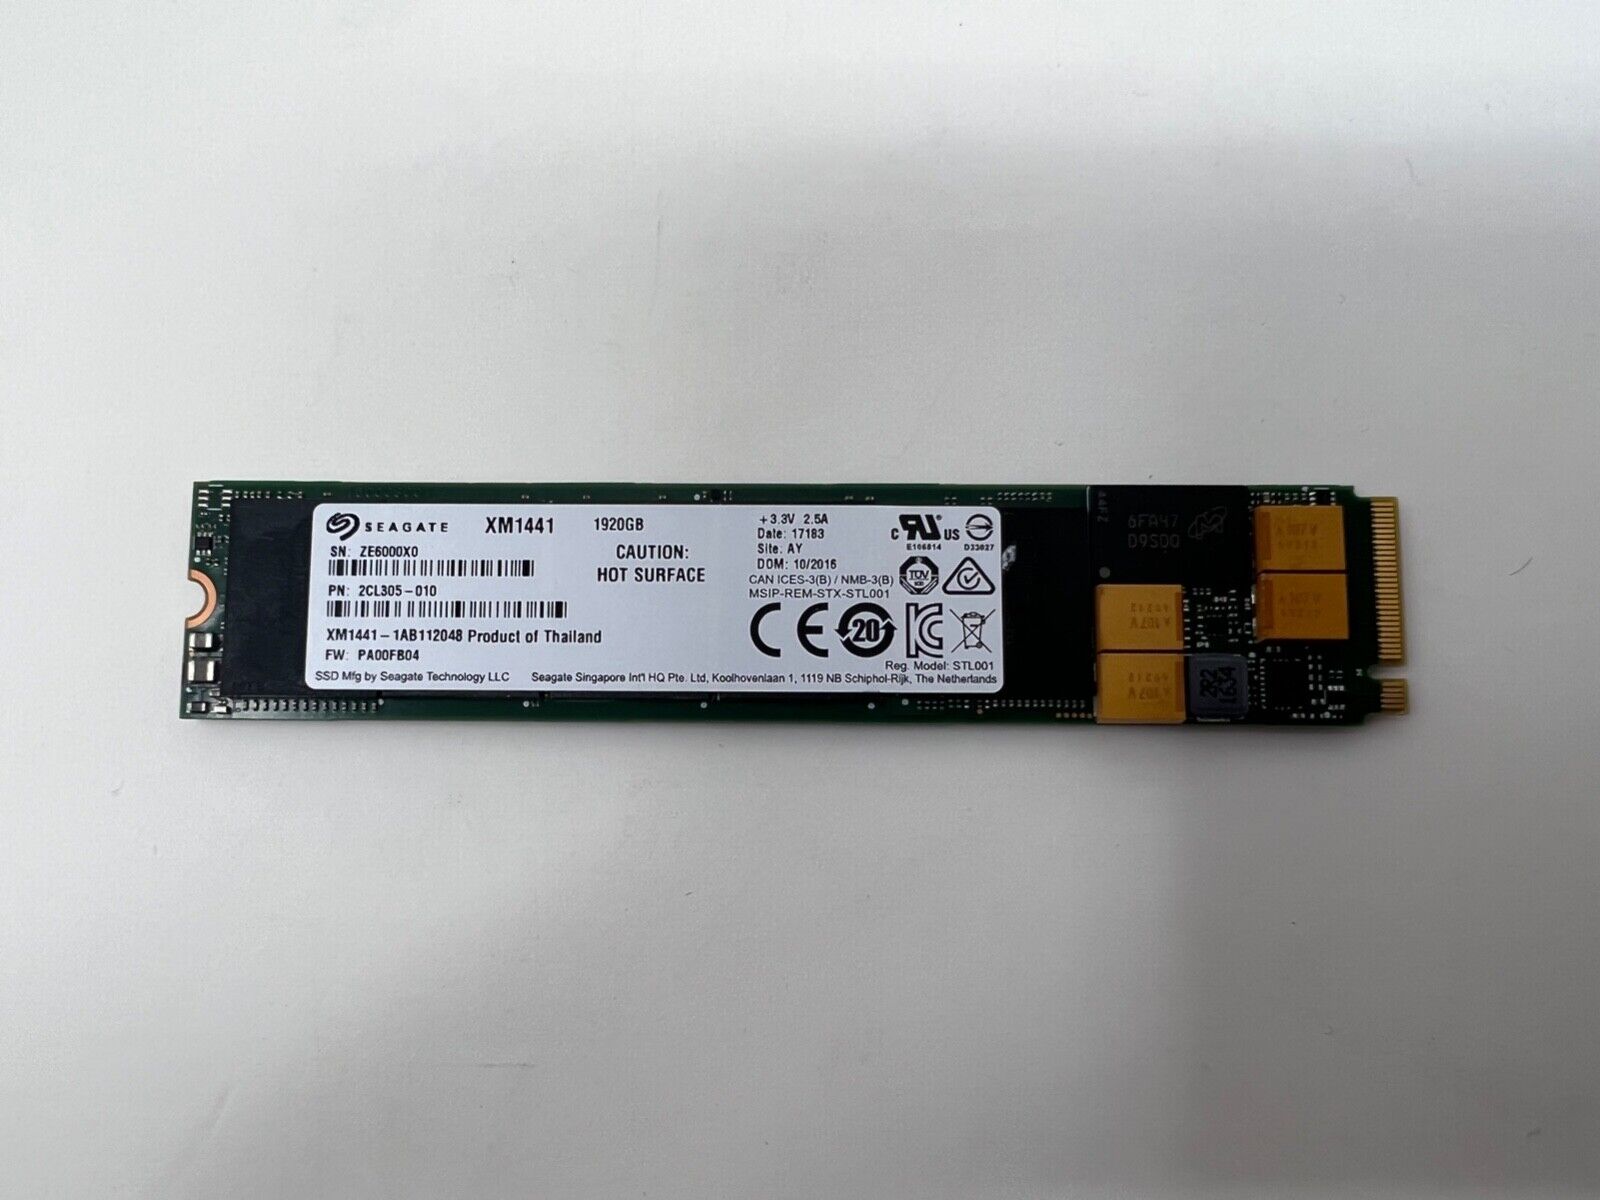 Seagate Nytro XM1441 1920GB Multi-Level-Cell PCI Express NVMe 3.0 x